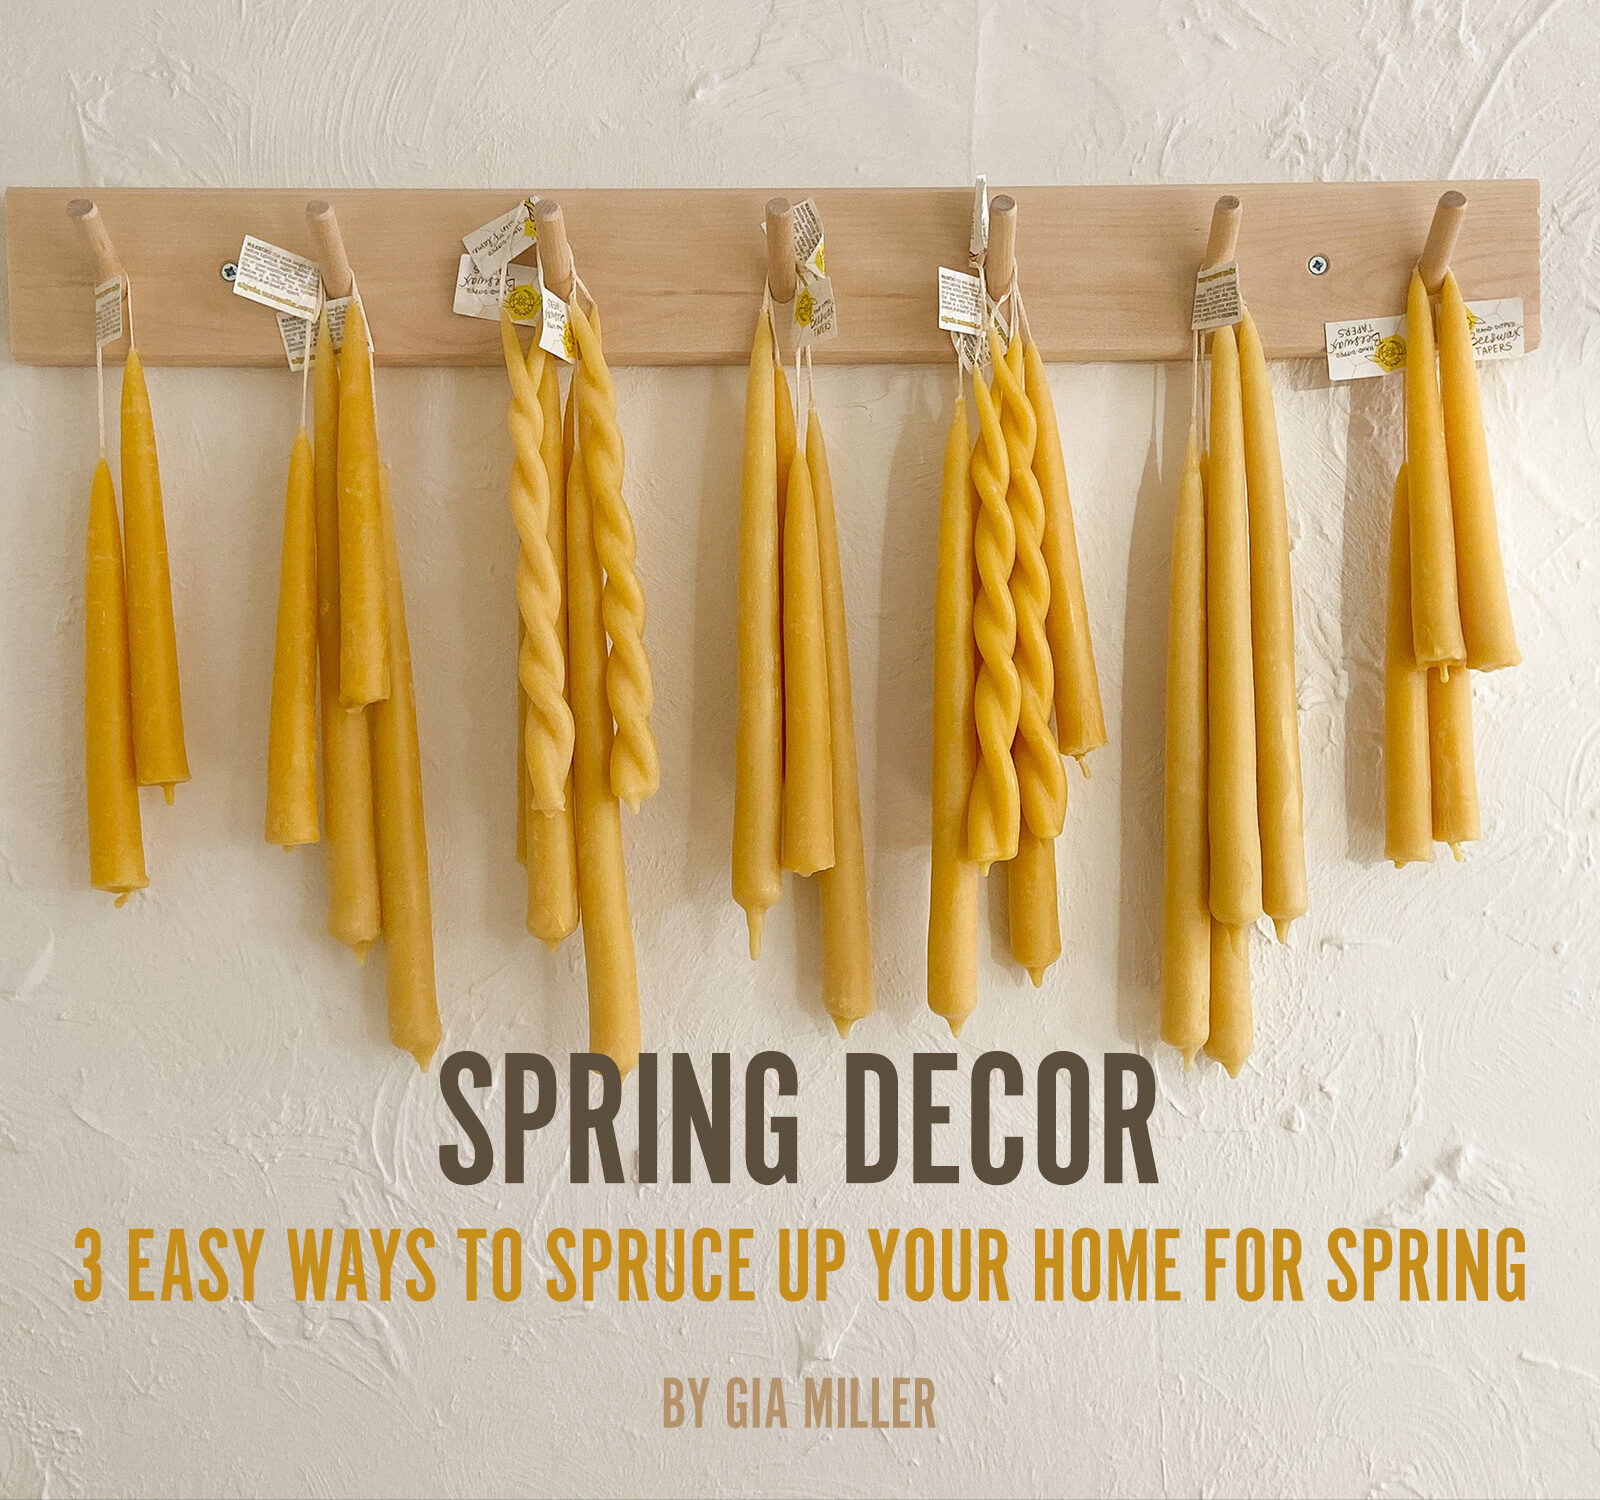 Spring Decor: 3 Easy Ways to Spruce Up Your Home For Spring